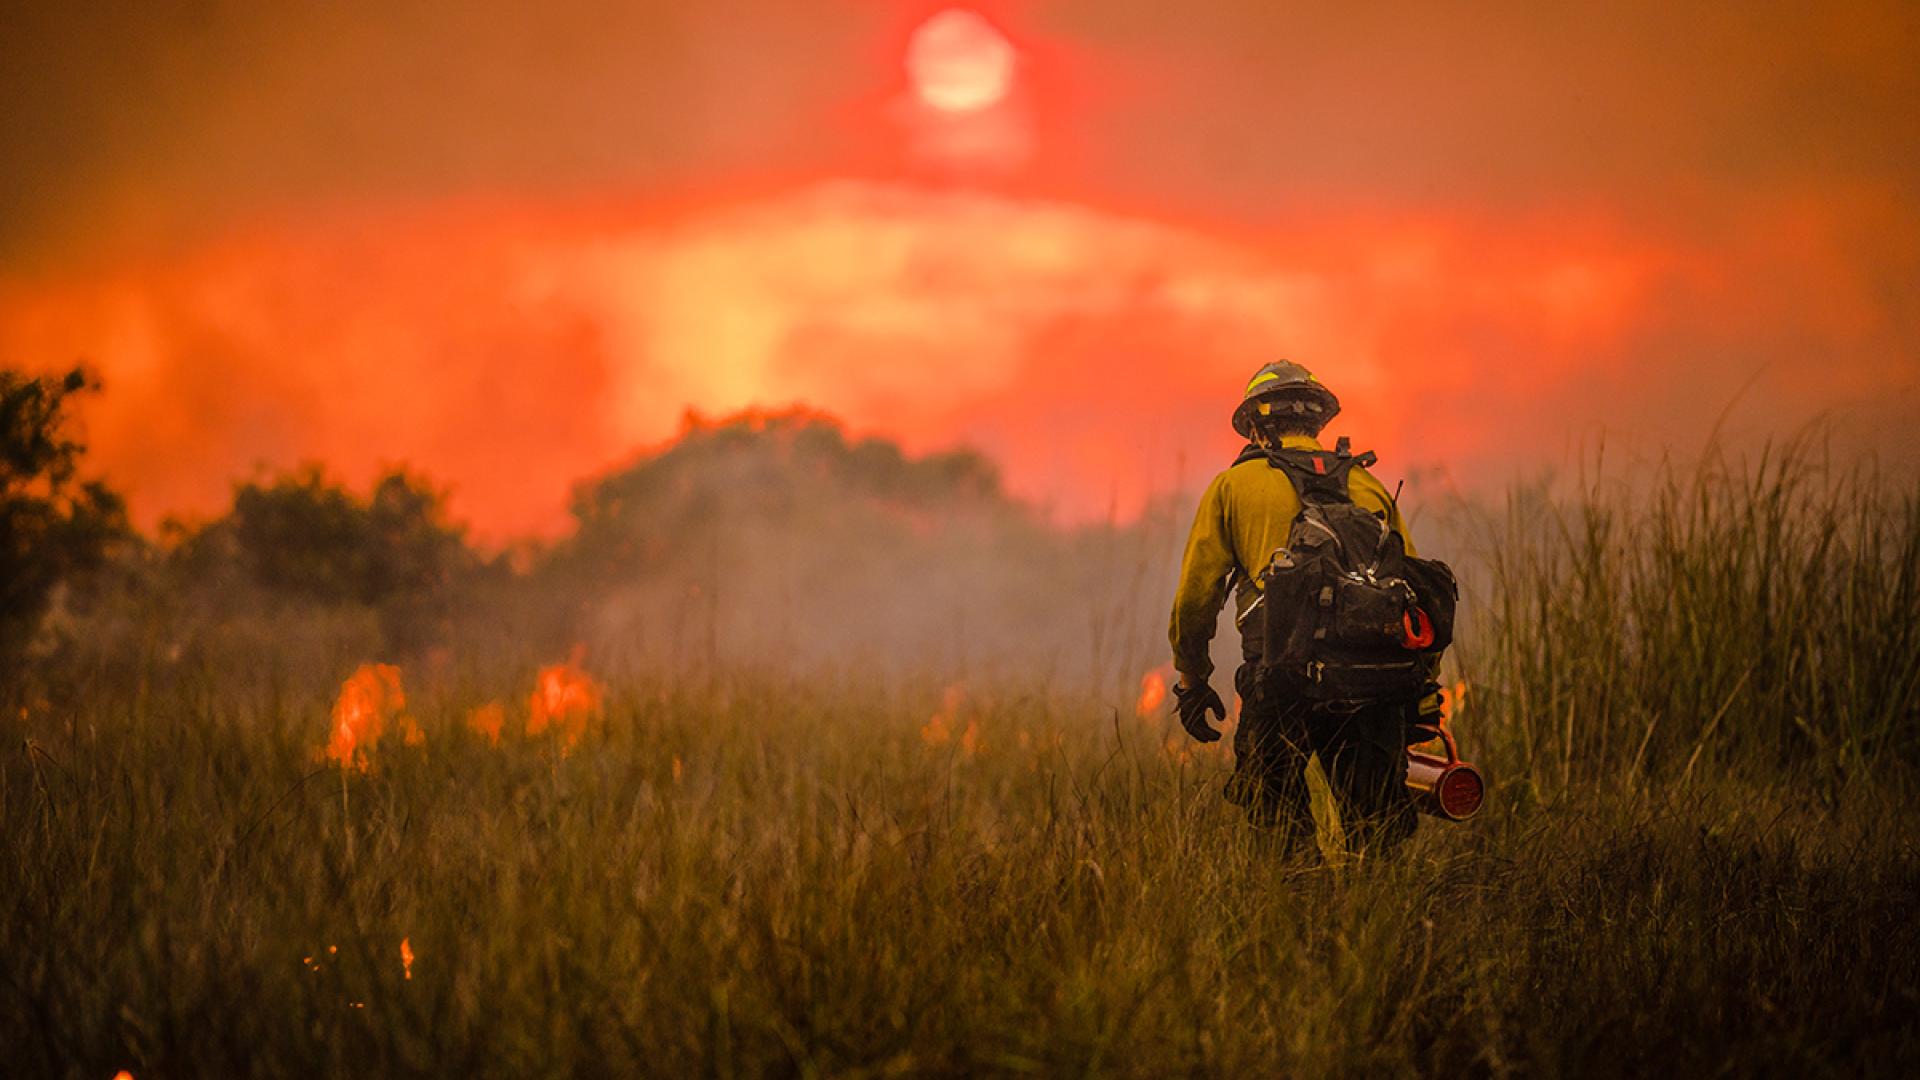 A firefighter works on a prescribed fire. Holding a drip torch, he walks away from the camera through knee-deep grass. Flames glow in small patches around him. In a hazy sky, a red sun lowers toward the trees on the horizon.